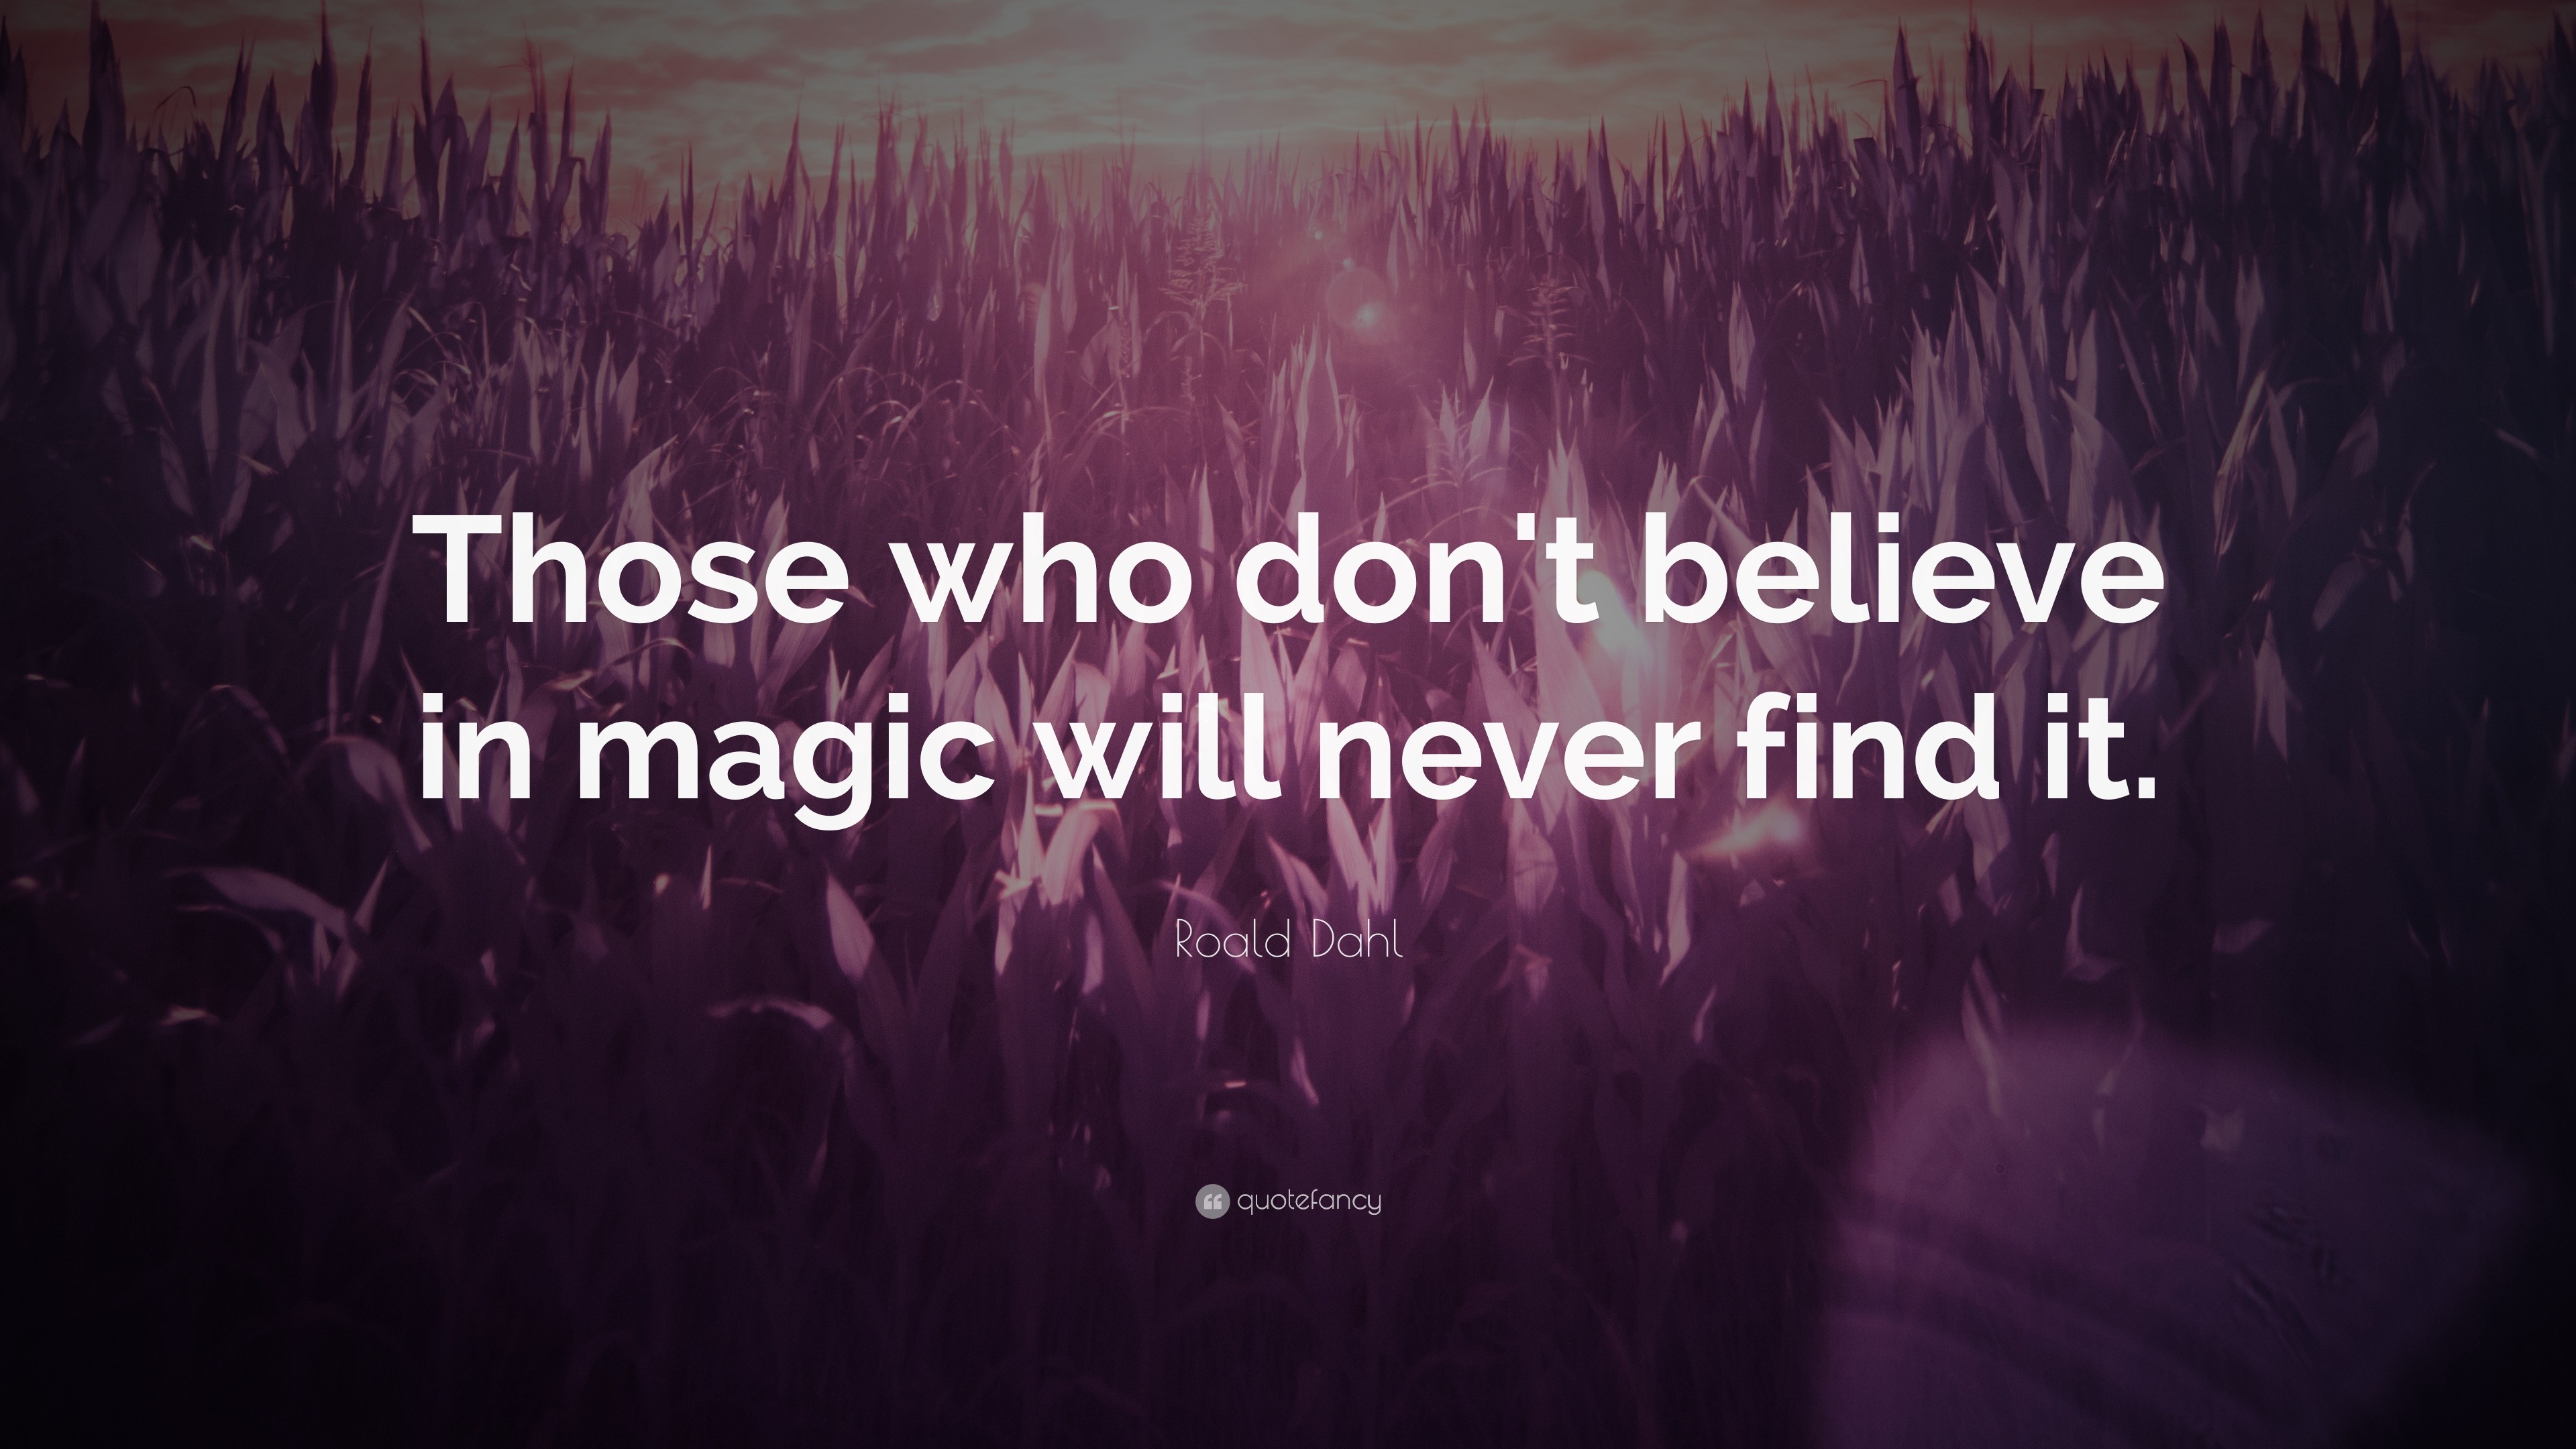 Roald Dahl Quote: “Those who don’t believe in magic will never find it